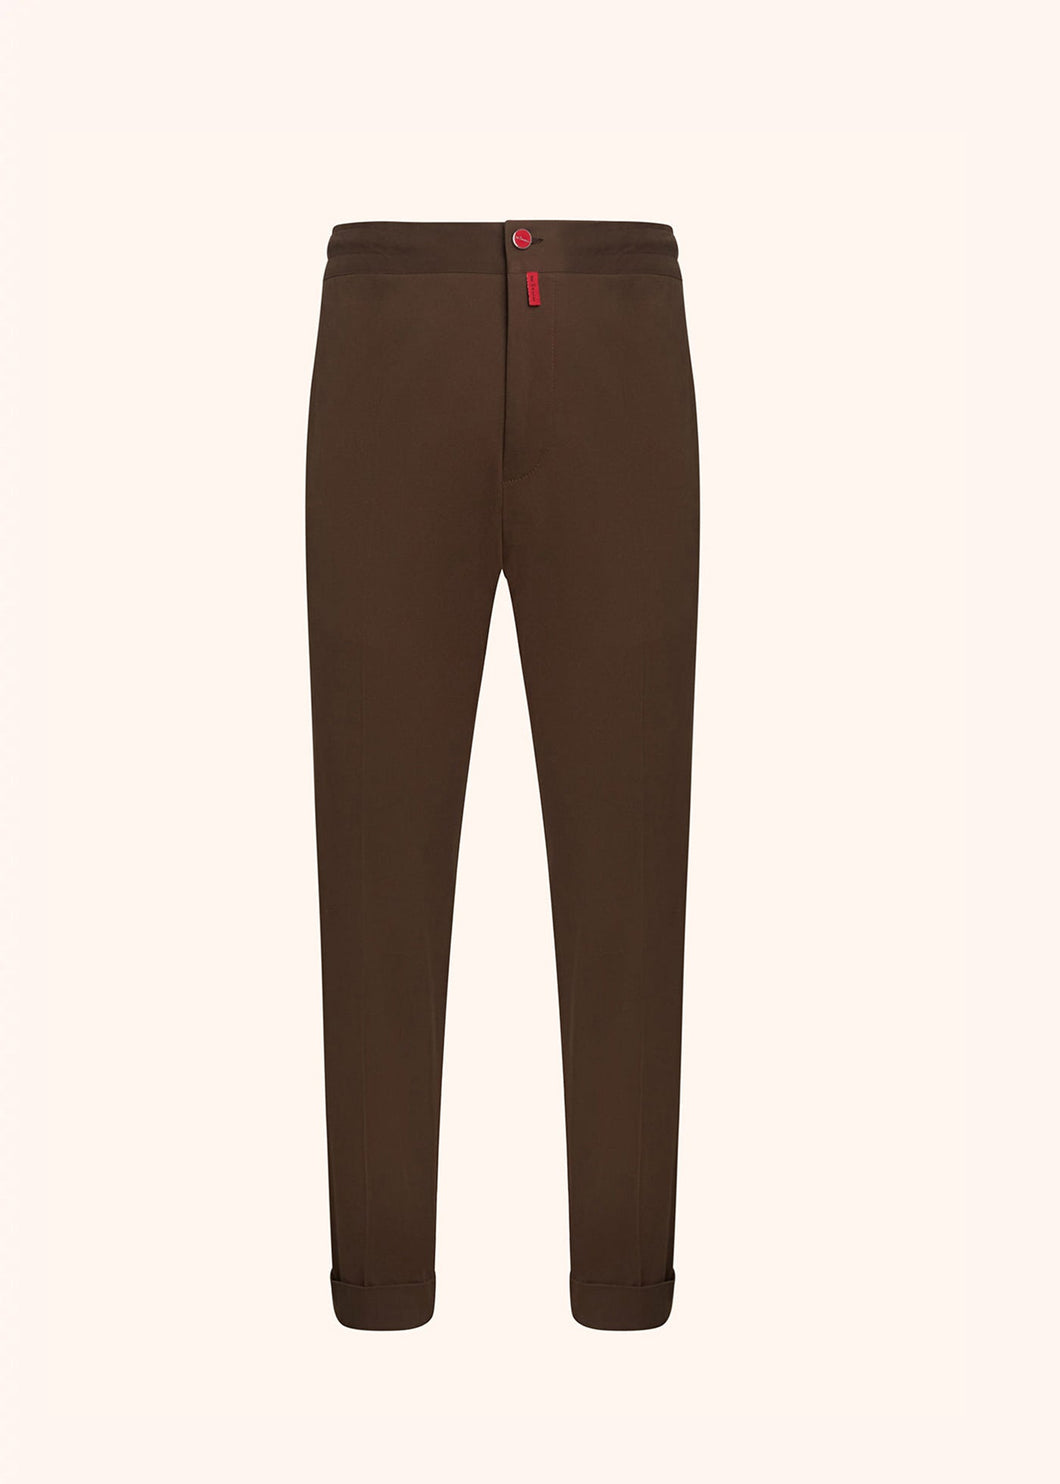 Kiton brown trousers for man, made of cotton